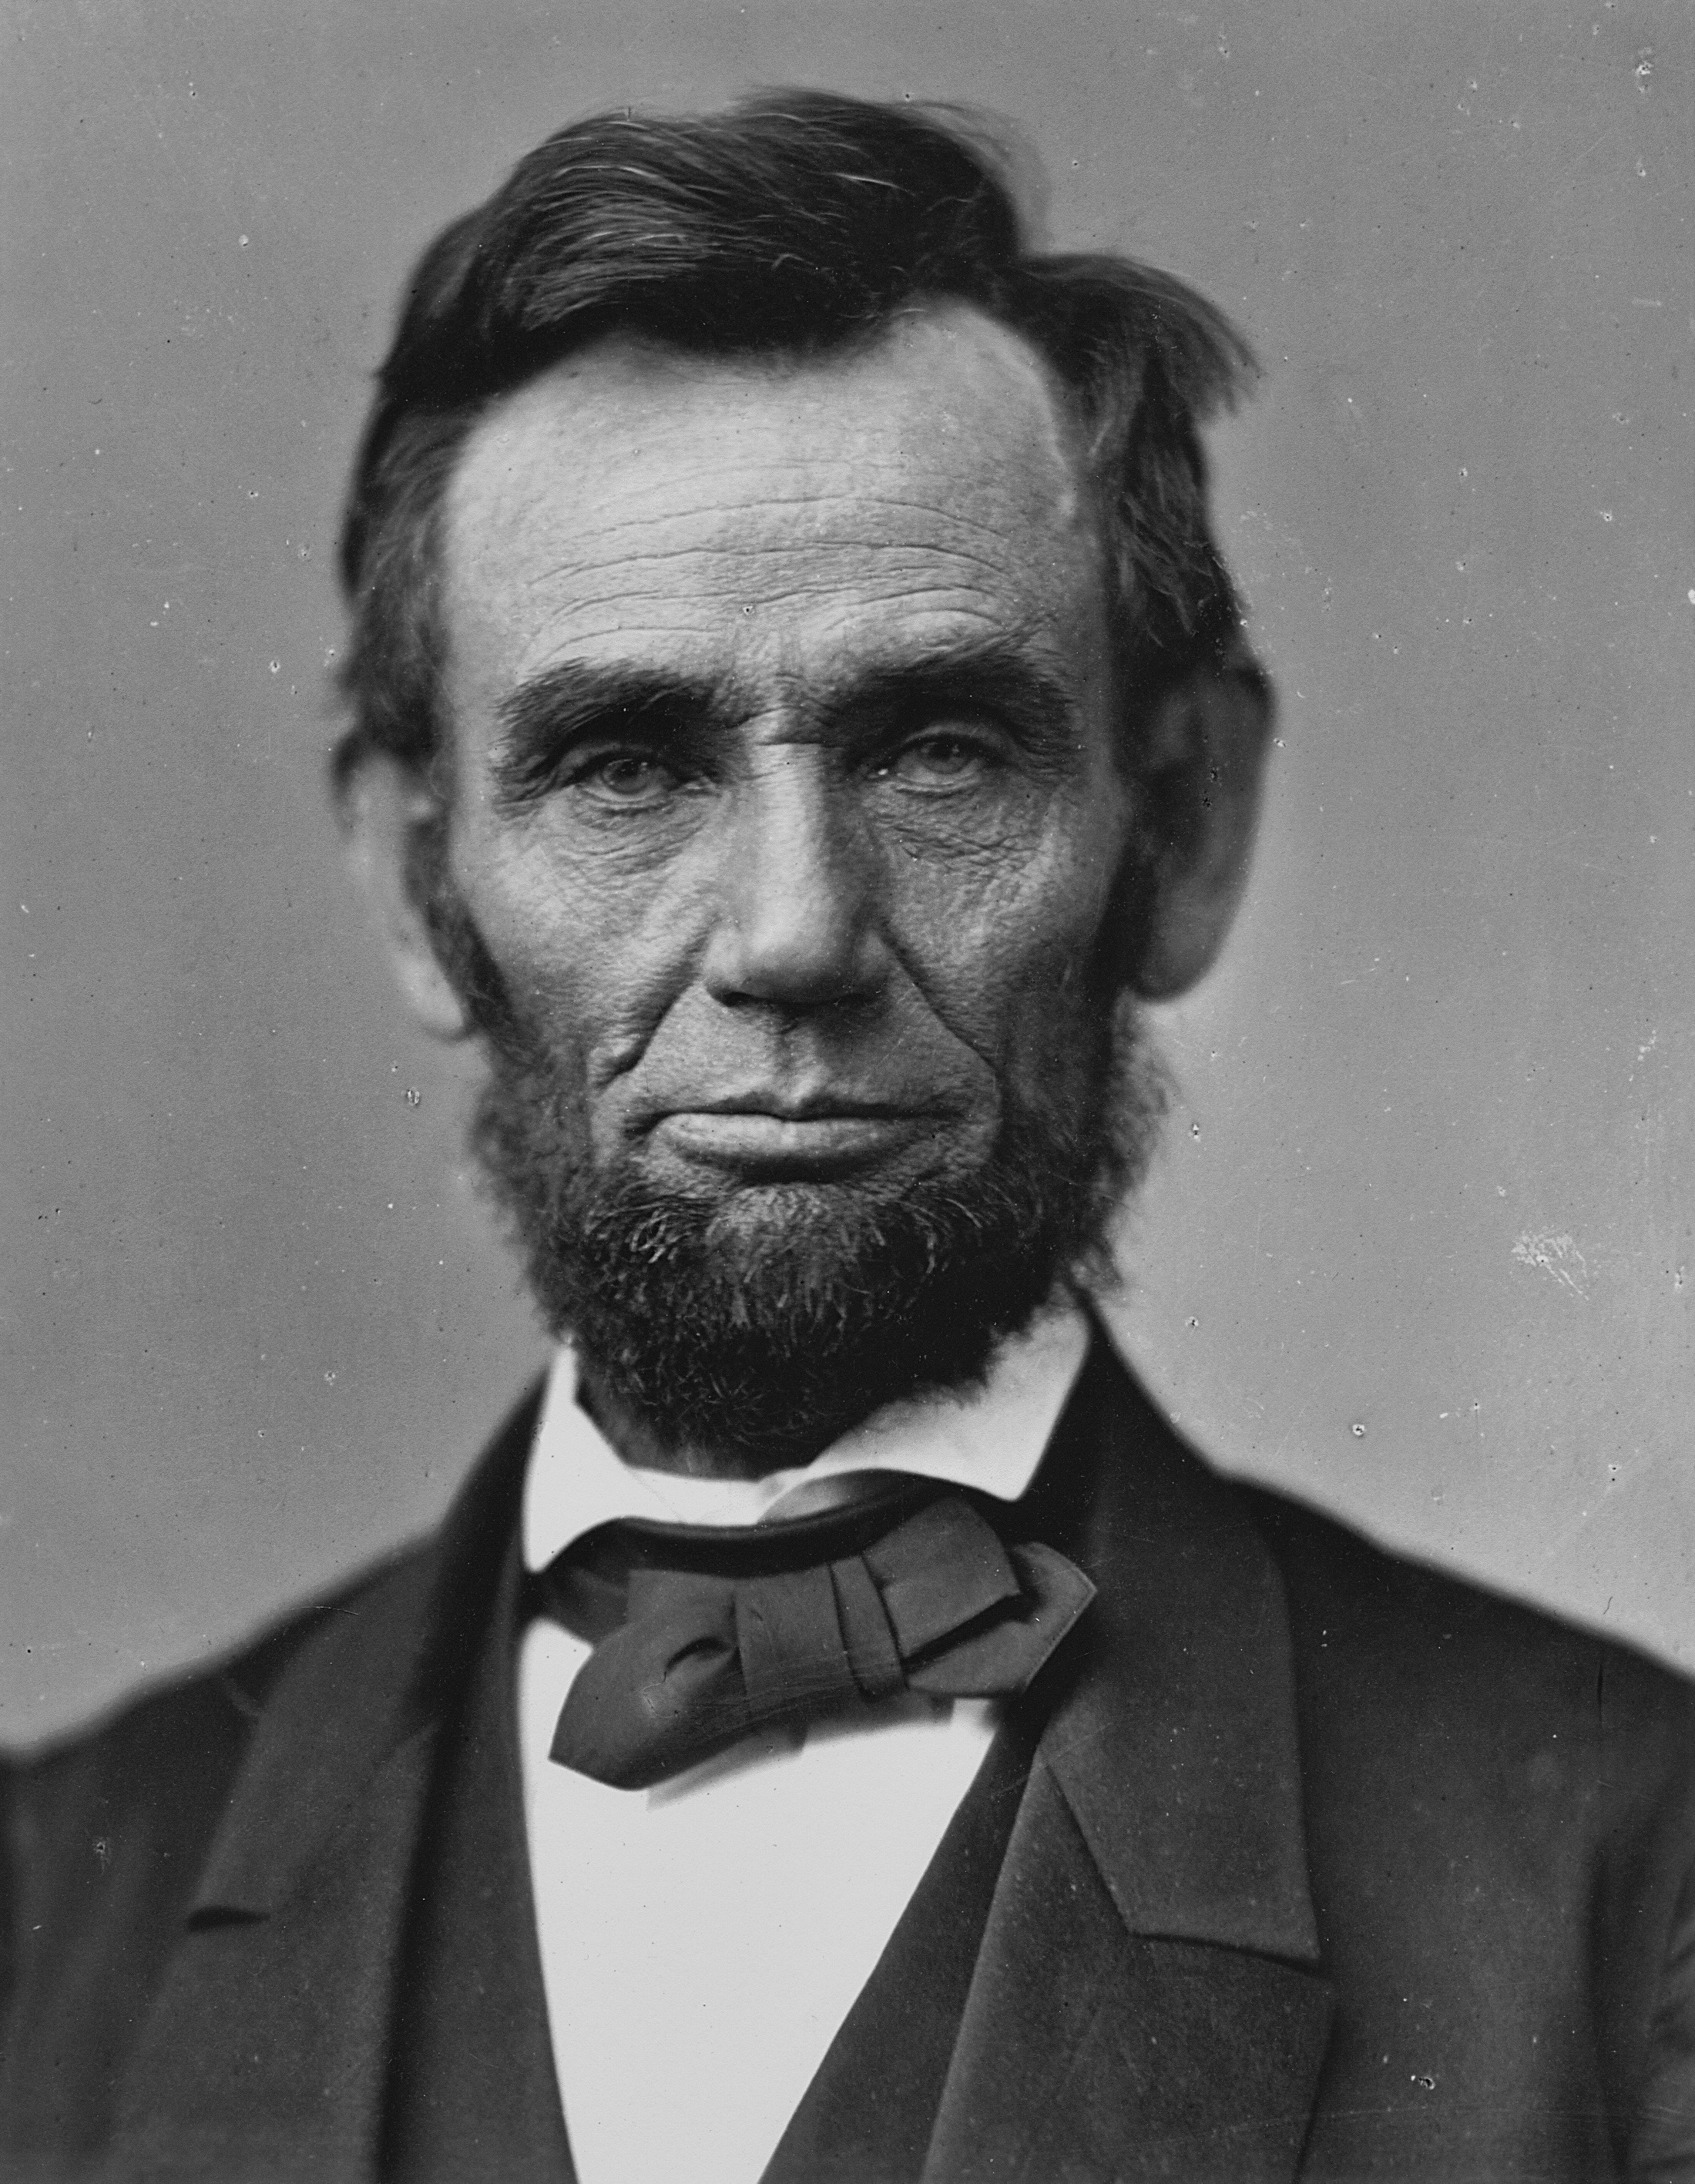 Black and white photo of Abraham Lincoln.